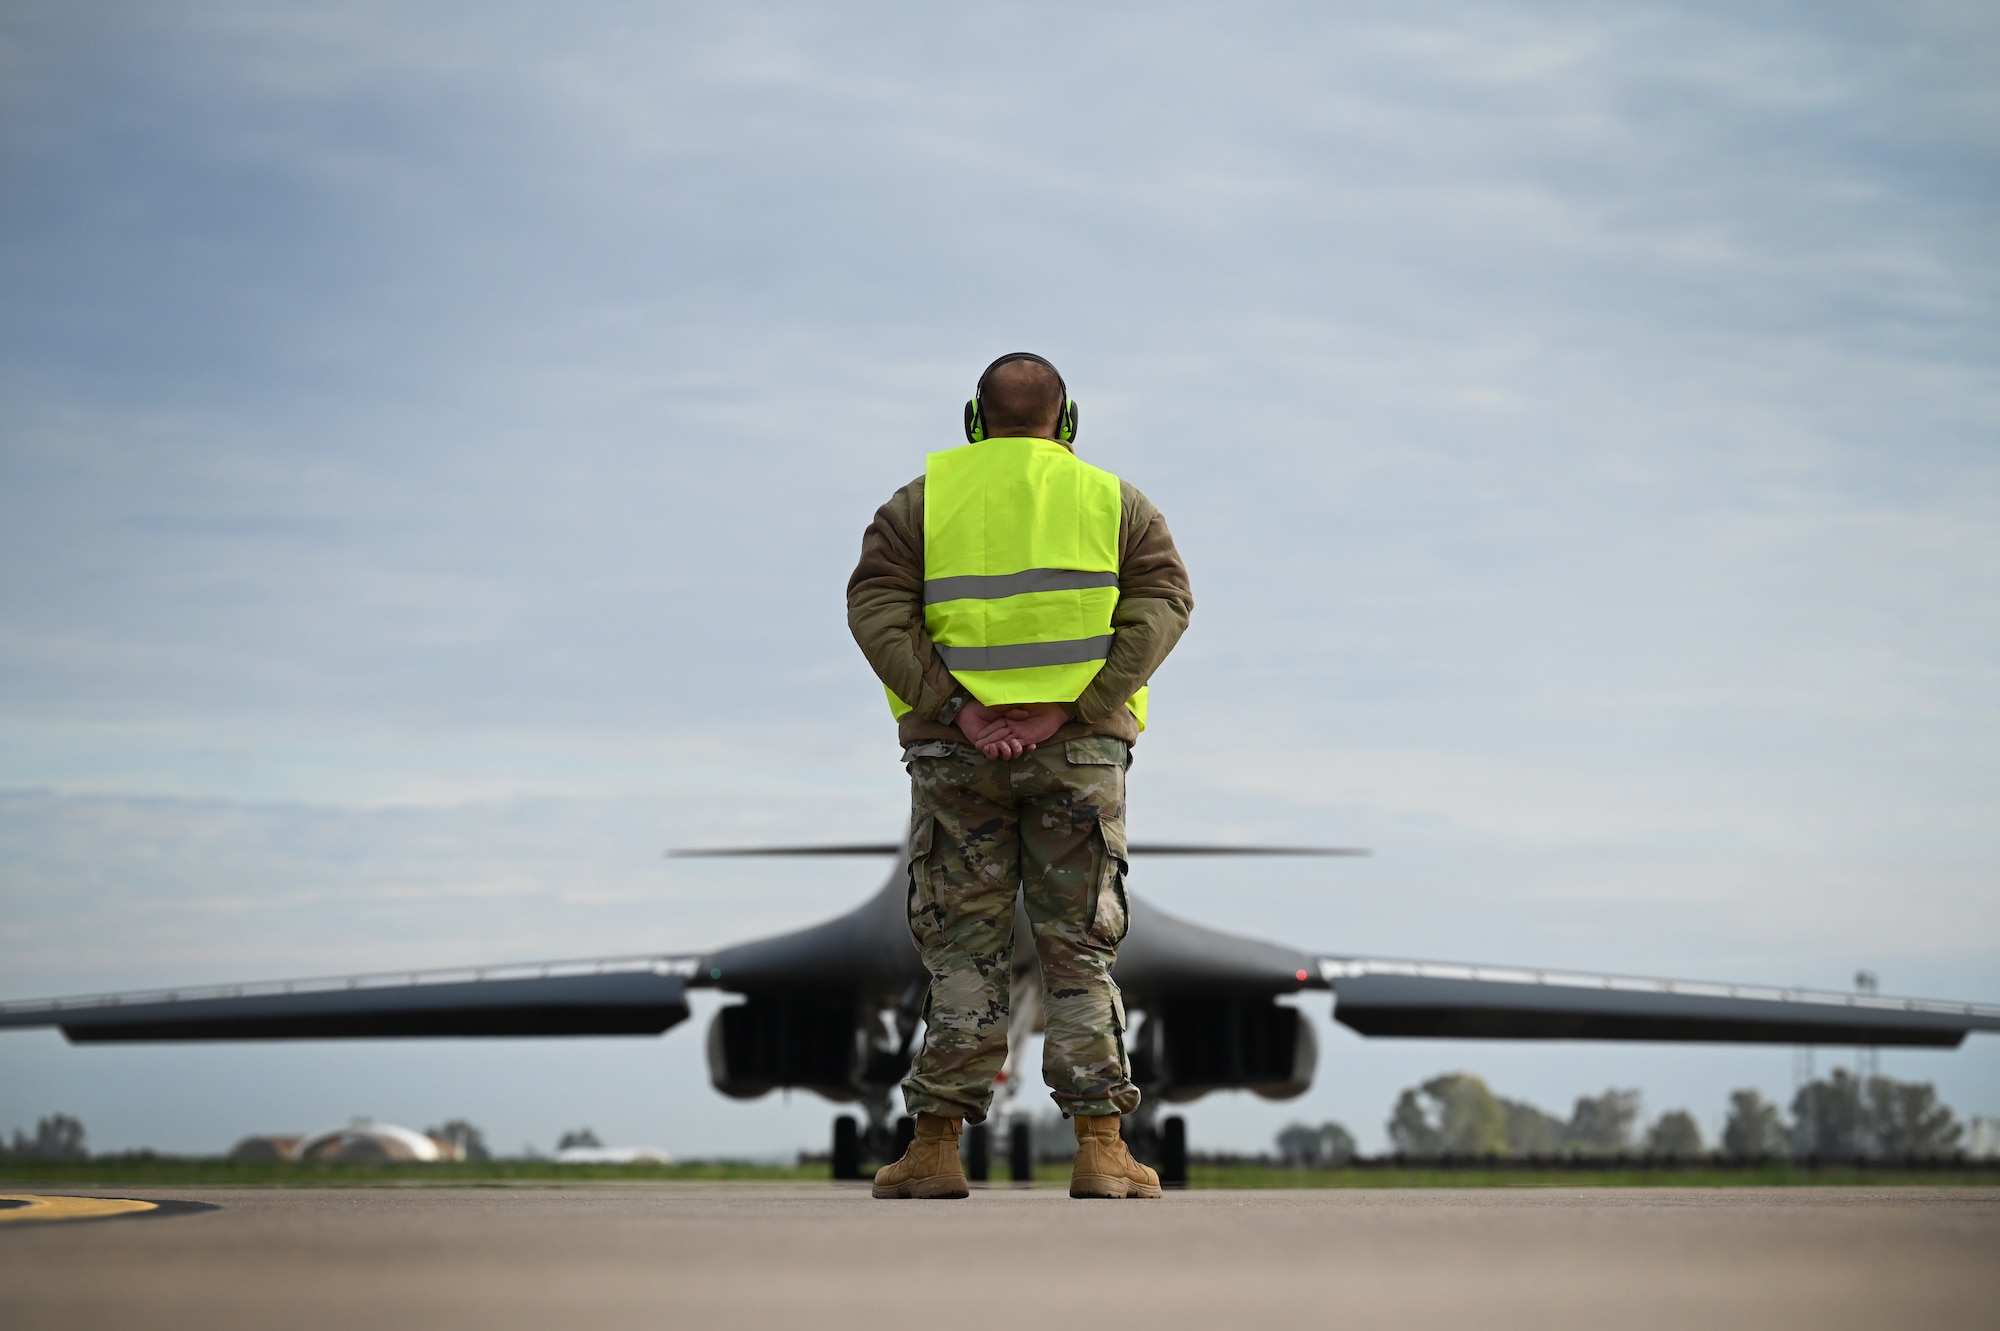 Chief Master Sgt. Justin Daigle, 9th Expeditionary Bomb Squadron Maintenance Senior Enlisted Leader, waits to marshall out a B-1B Lancer during Bomber Task Force 24-2 at Morón Air Base, Spain, April 2, 2024. BTF 24-2 is a part of LSGE 24, an umbrella term that incorporates dozens of separate exercises and military activities, under multiple combatant commands, that enable the U.S. Joint Force to train with Allies and partners and improve shared understanding, trust and interoperability on security challenges across the globe. (U.S. Air Force photo by Staff Sgt. Holly Cook)